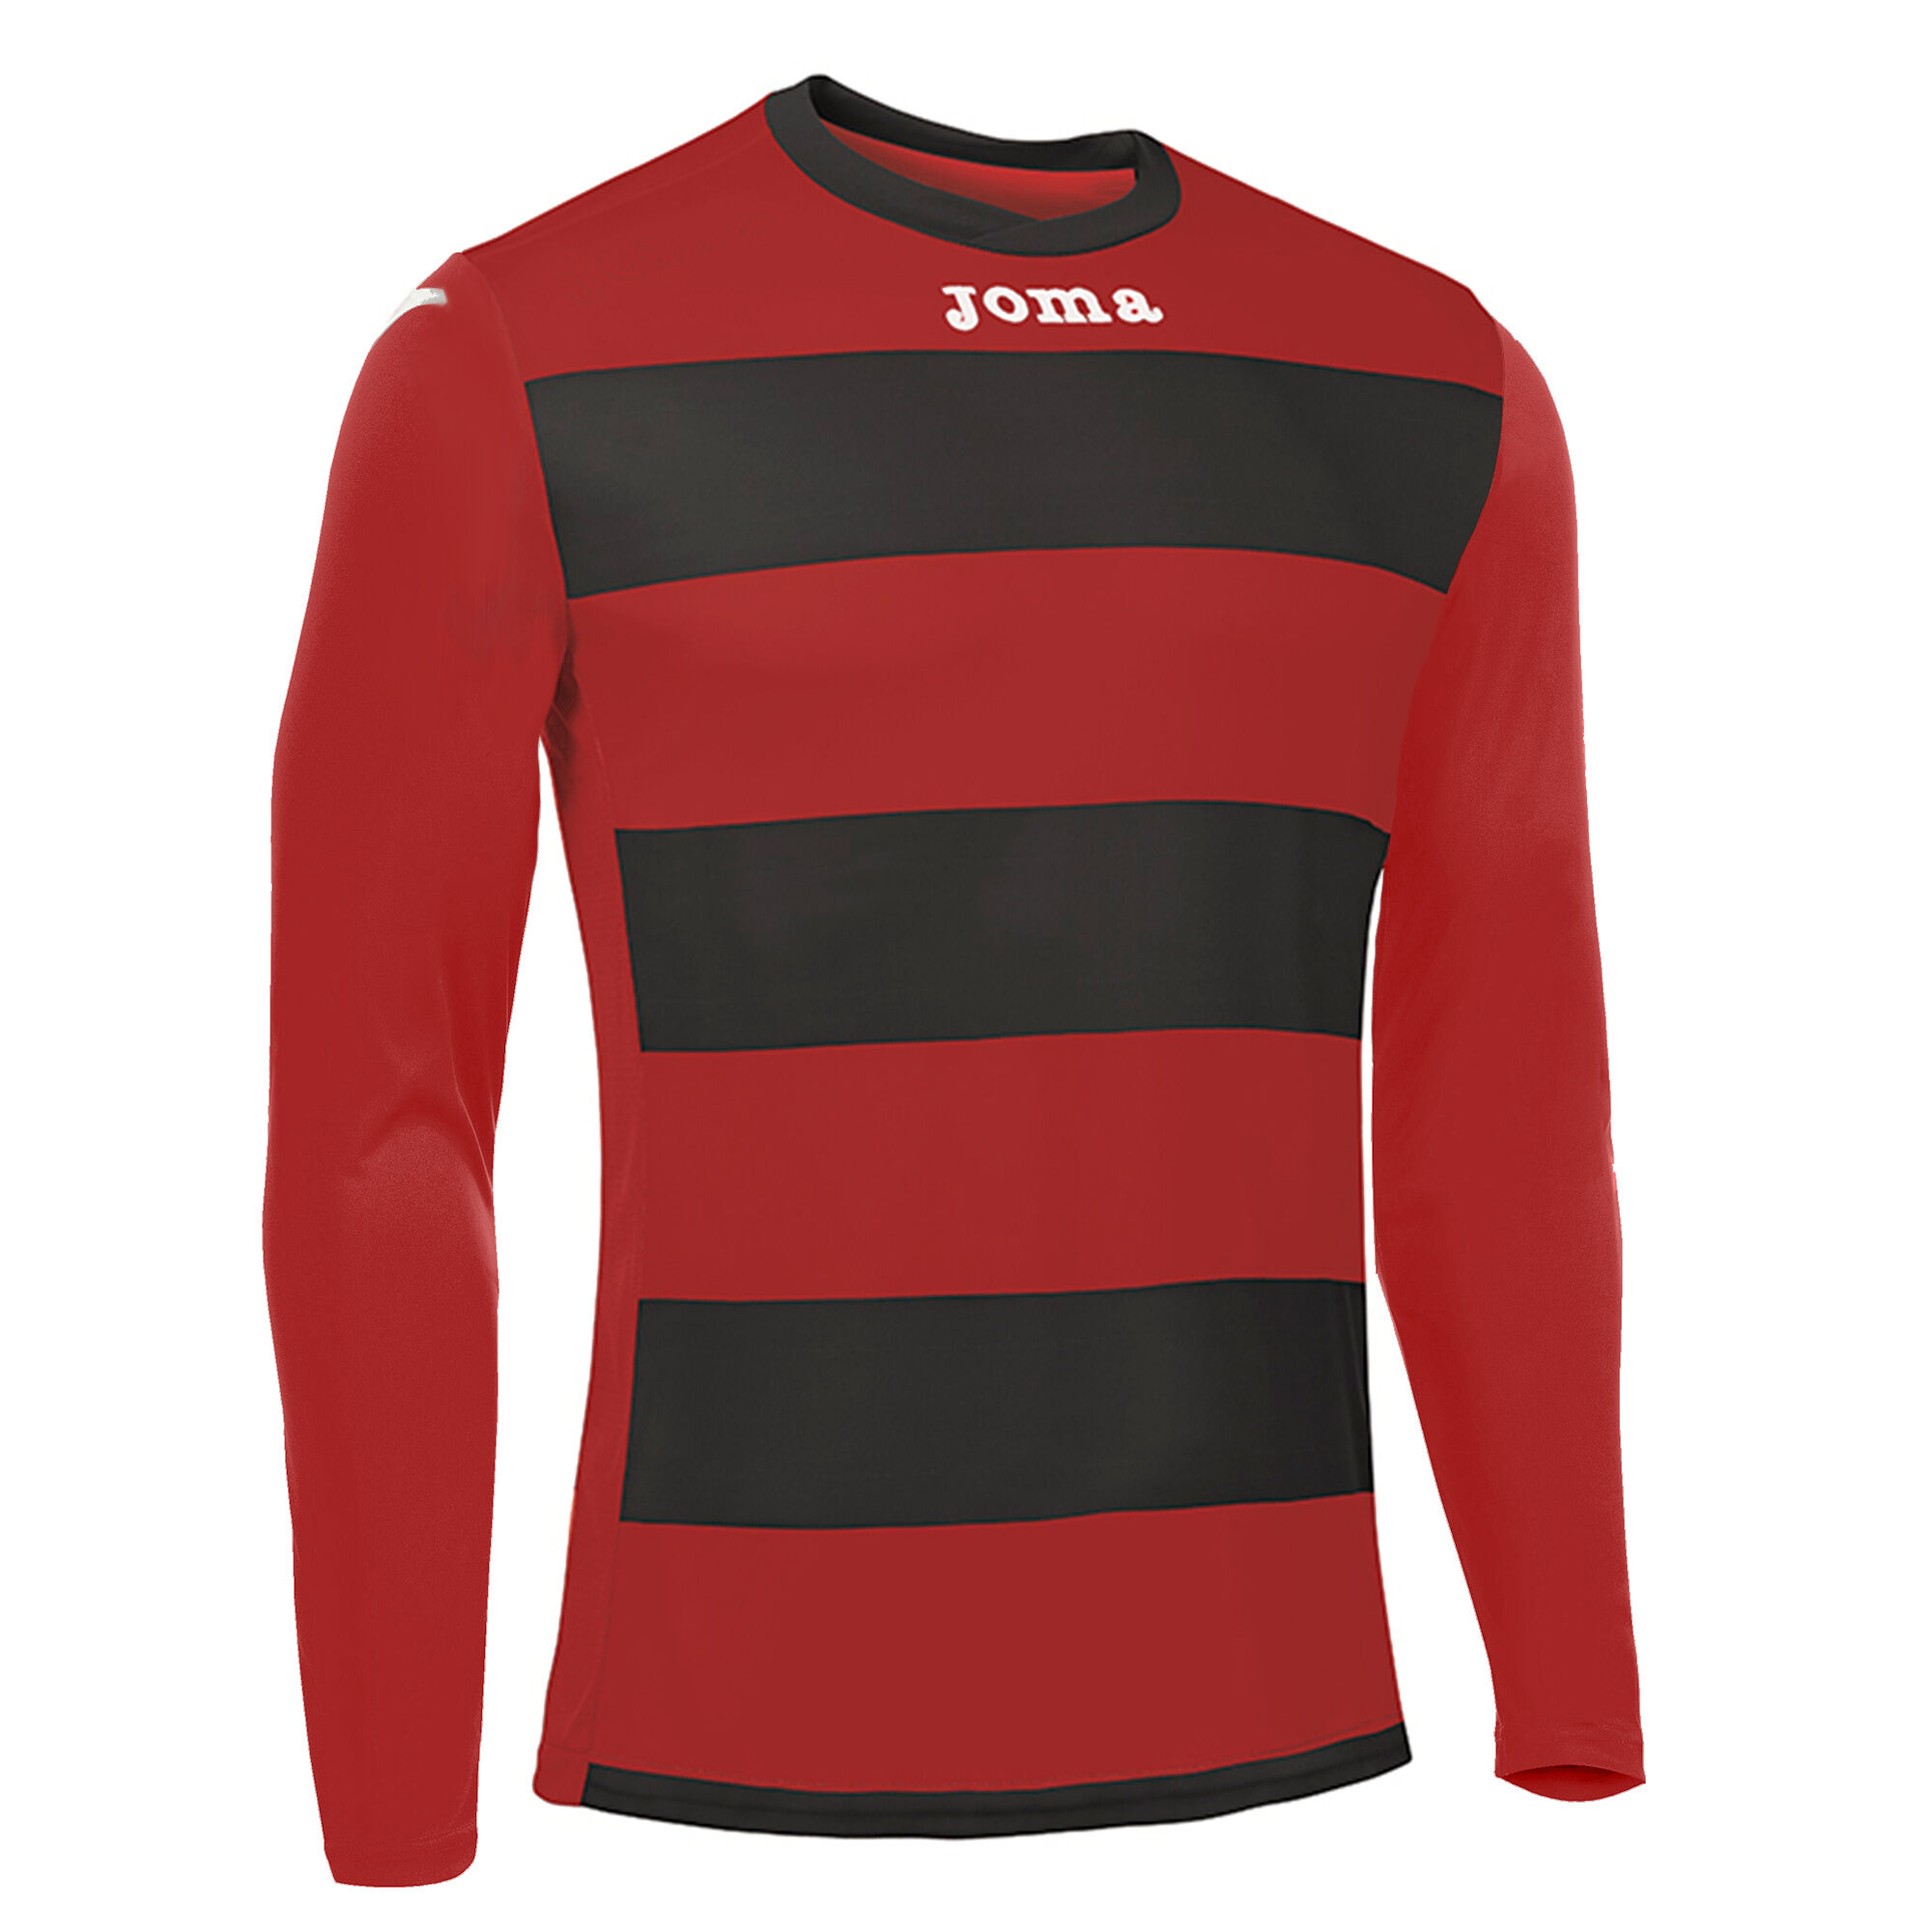 MAILLOT MANCHES LONGUES HOMME EUROPA III NOIR ROUGE